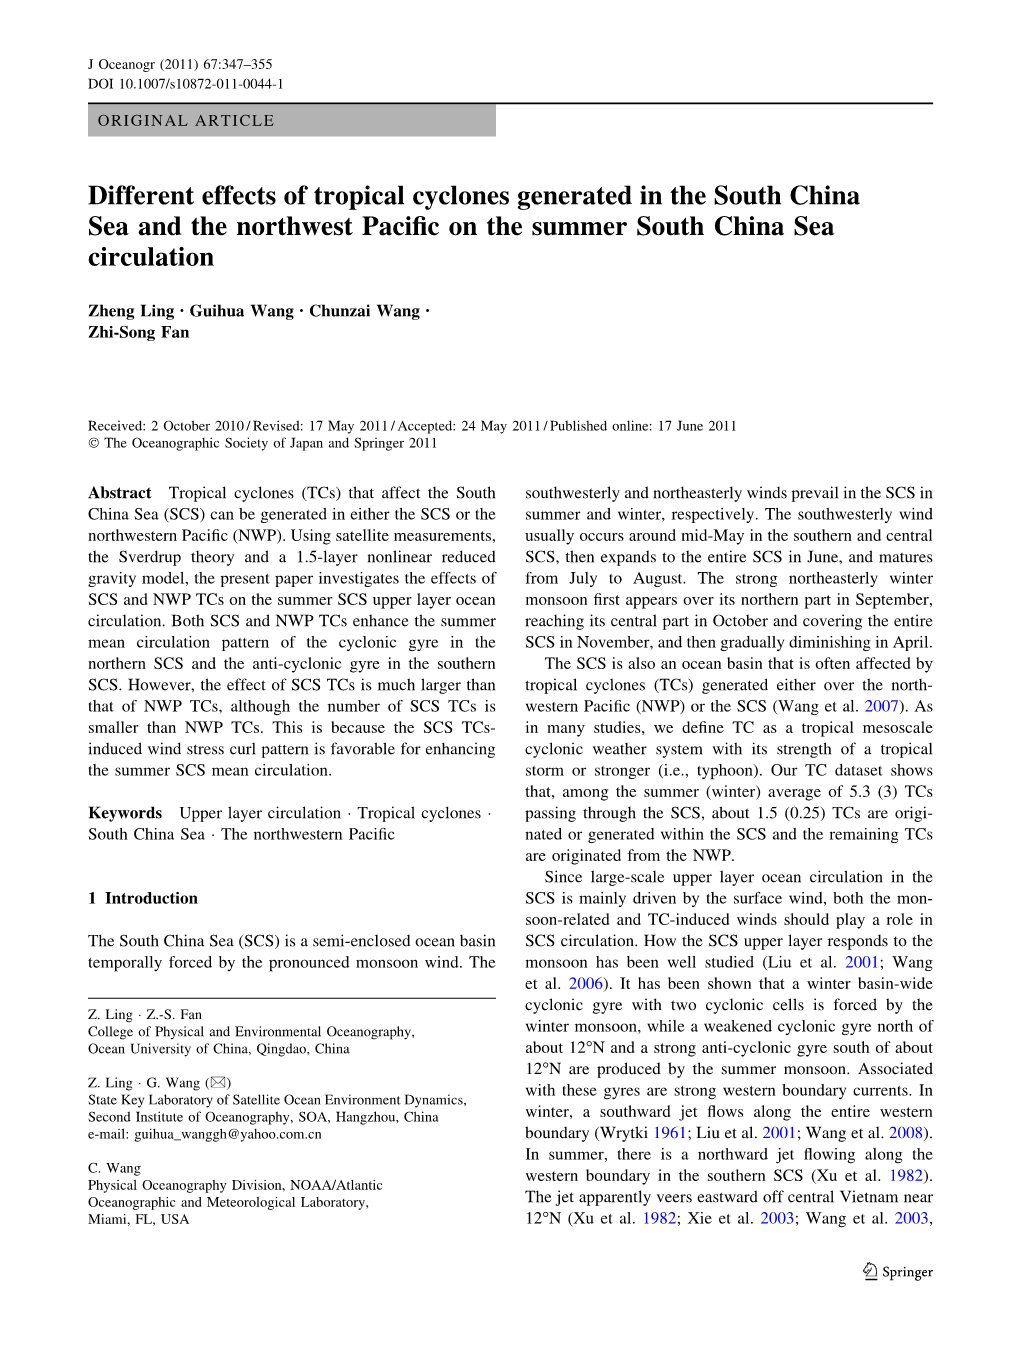 Different Effects of Tropical Cyclones Generated in the South China Sea and the Northwest Paciﬁc on the Summer South China Sea Circulation